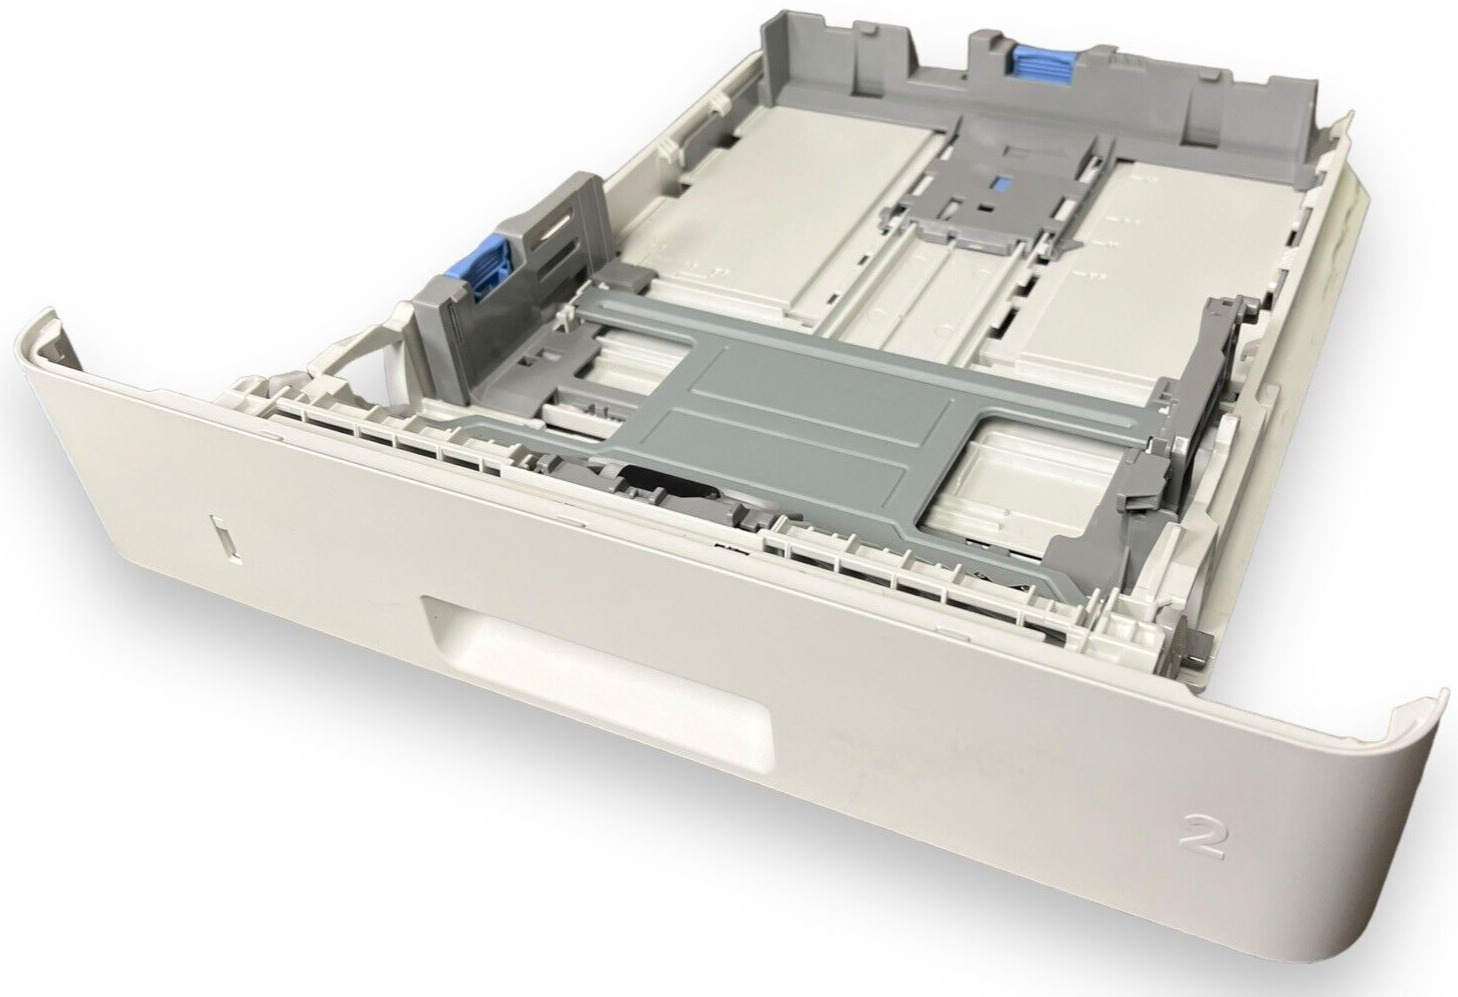 HP RU7-8225 Paper Tray 2 for LaserJet Pro M402 M404 M426 M428 M430 - TESTED